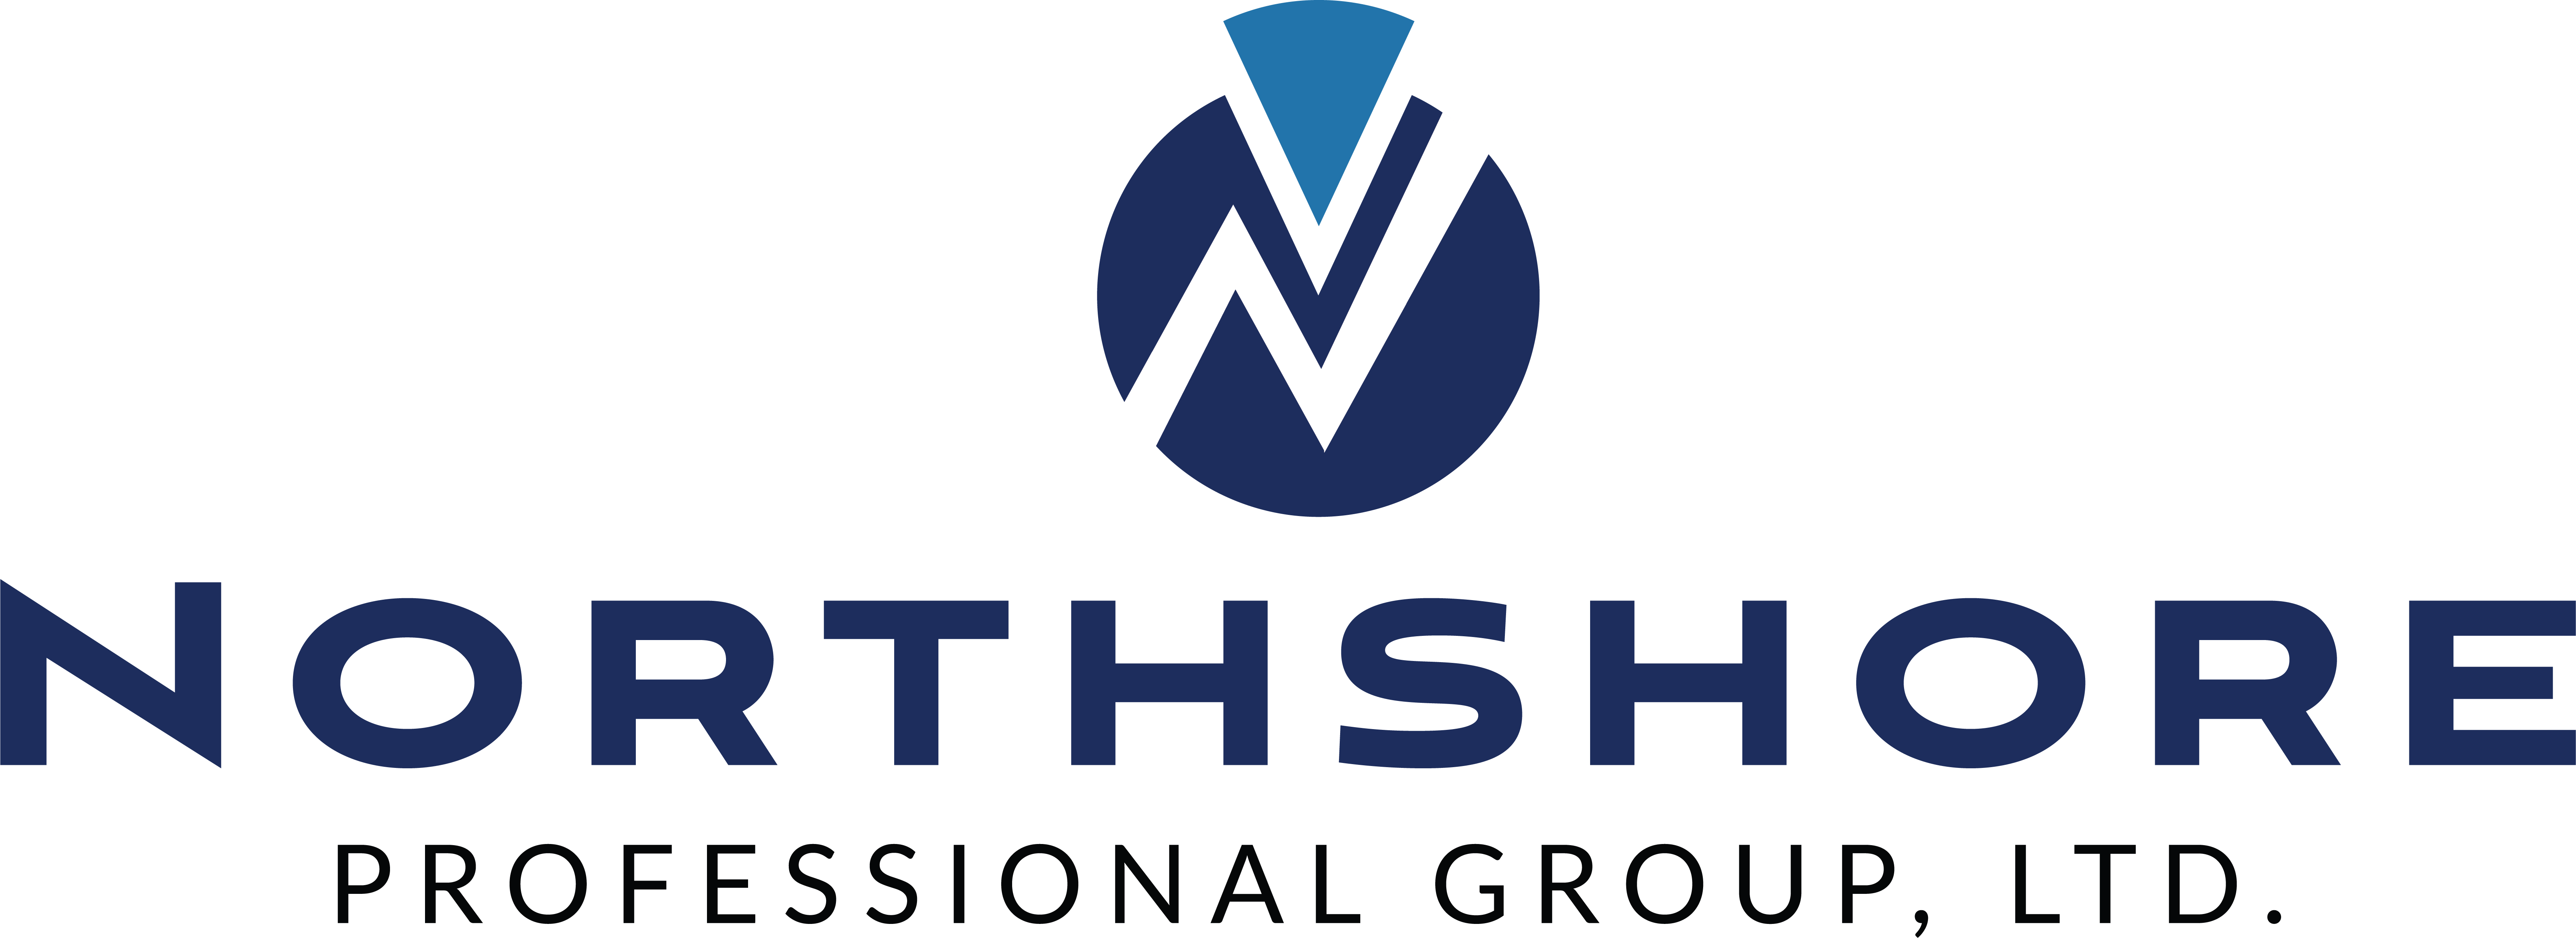 Northshore Professional Group